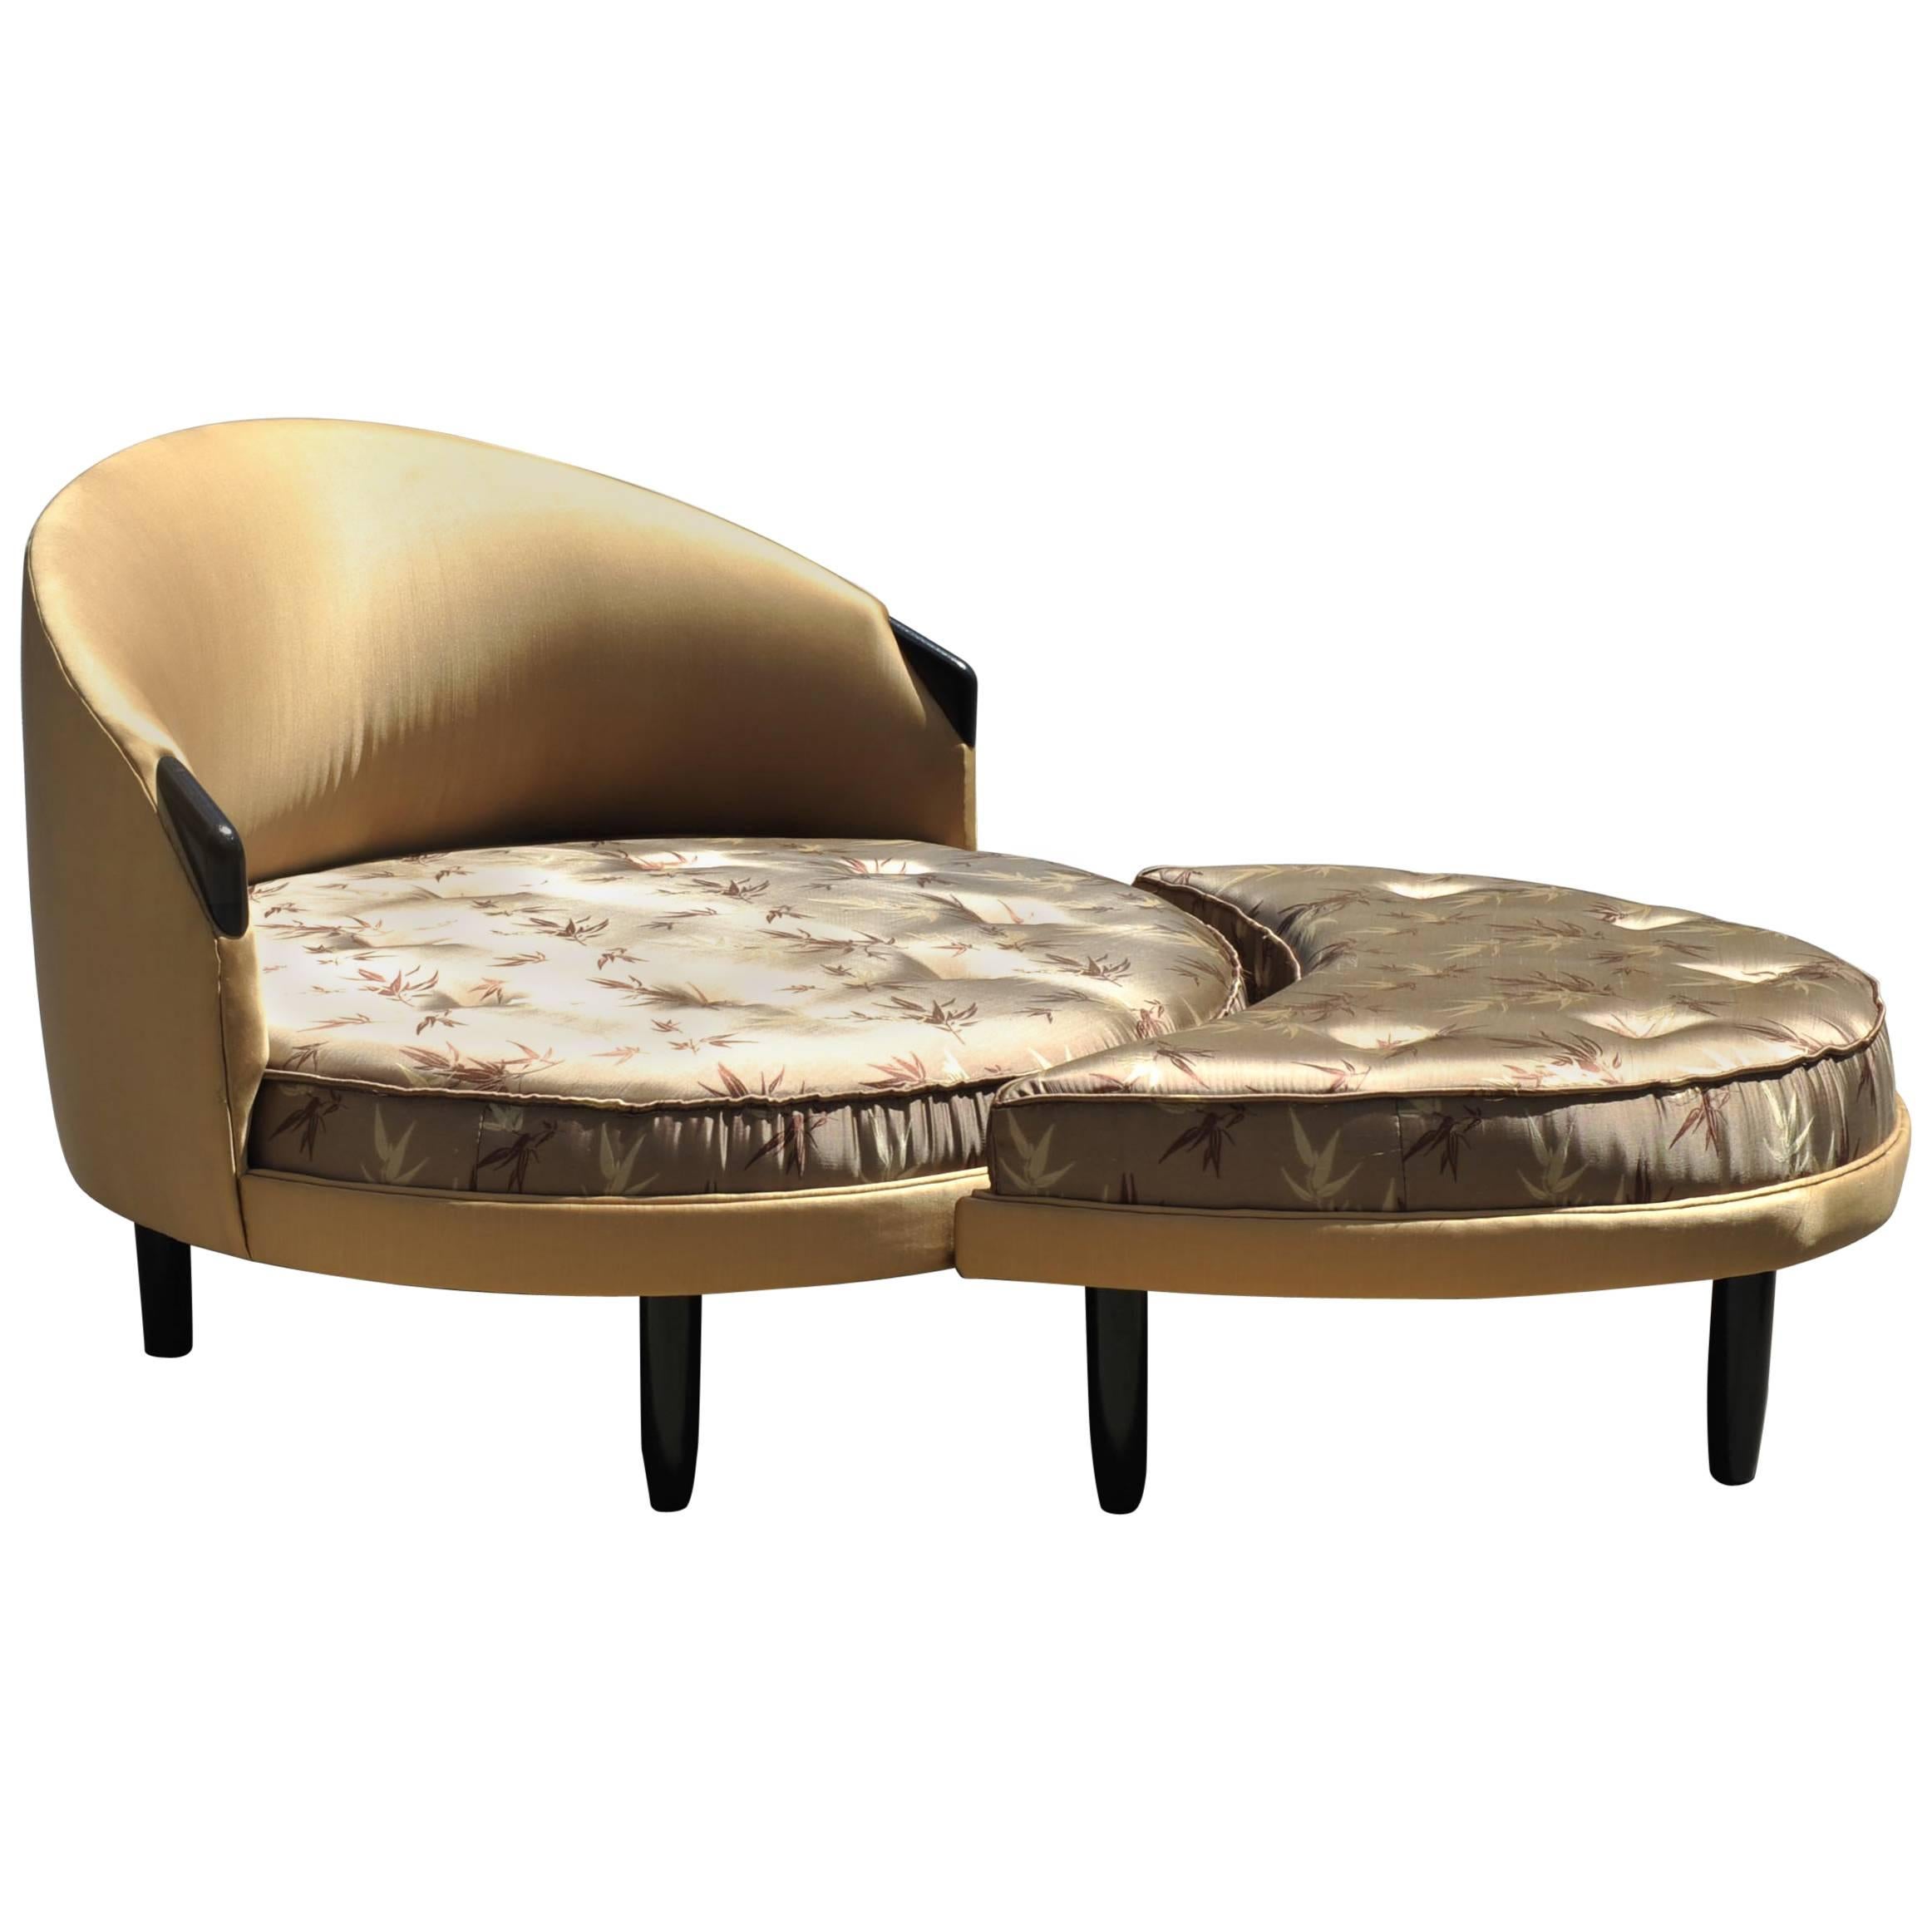 Havana Chair and Ottoman by Adrian Pearsall